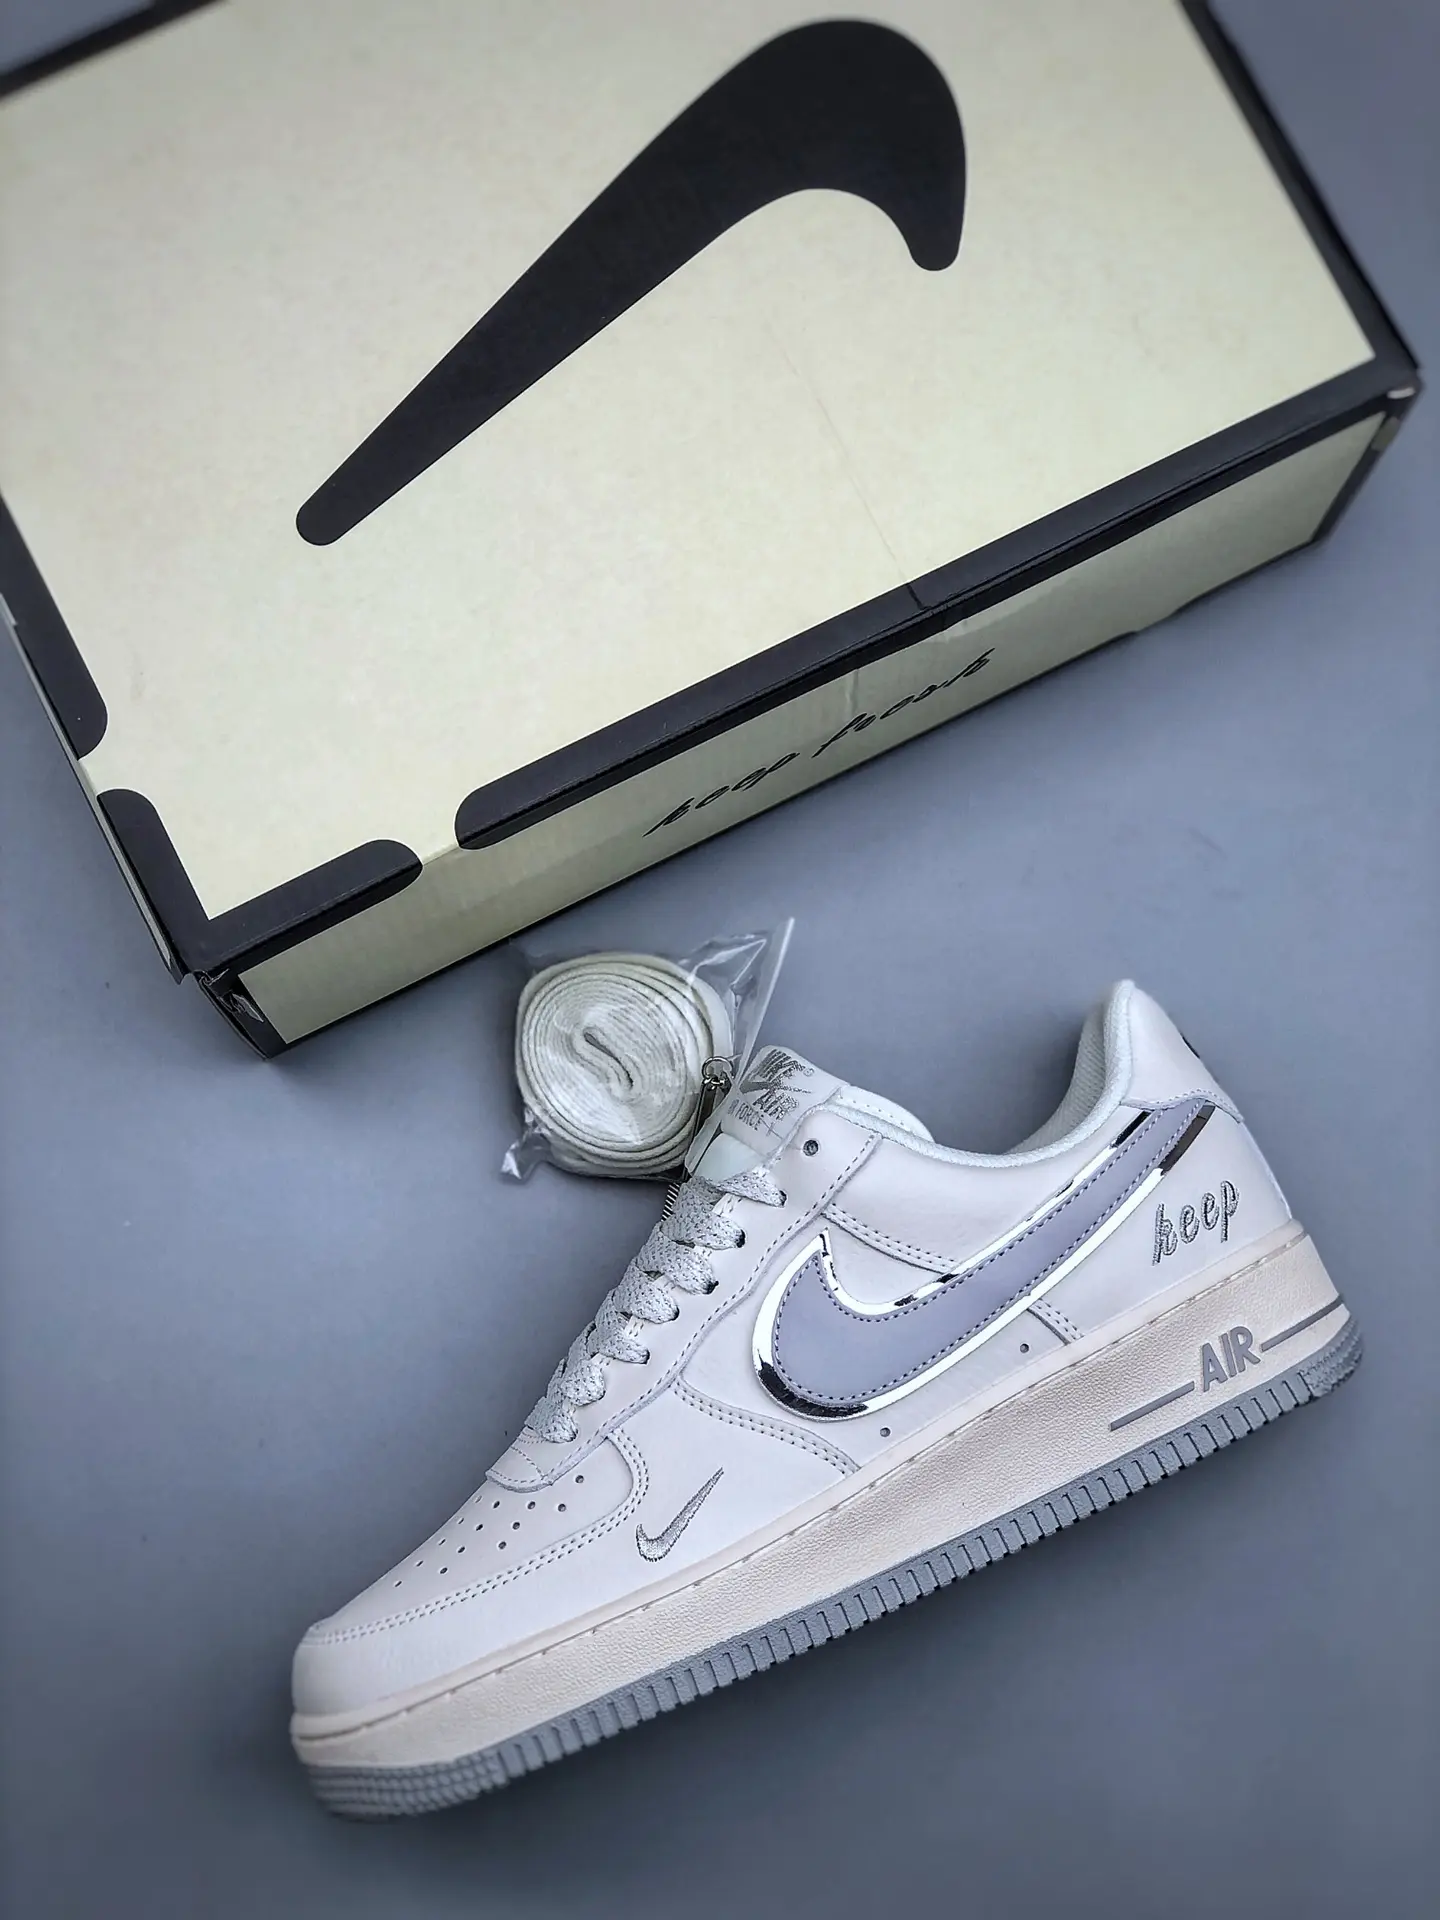 YASSW | Nike Air Force 1 Low Keep Fresh White Grey Sneakers Review